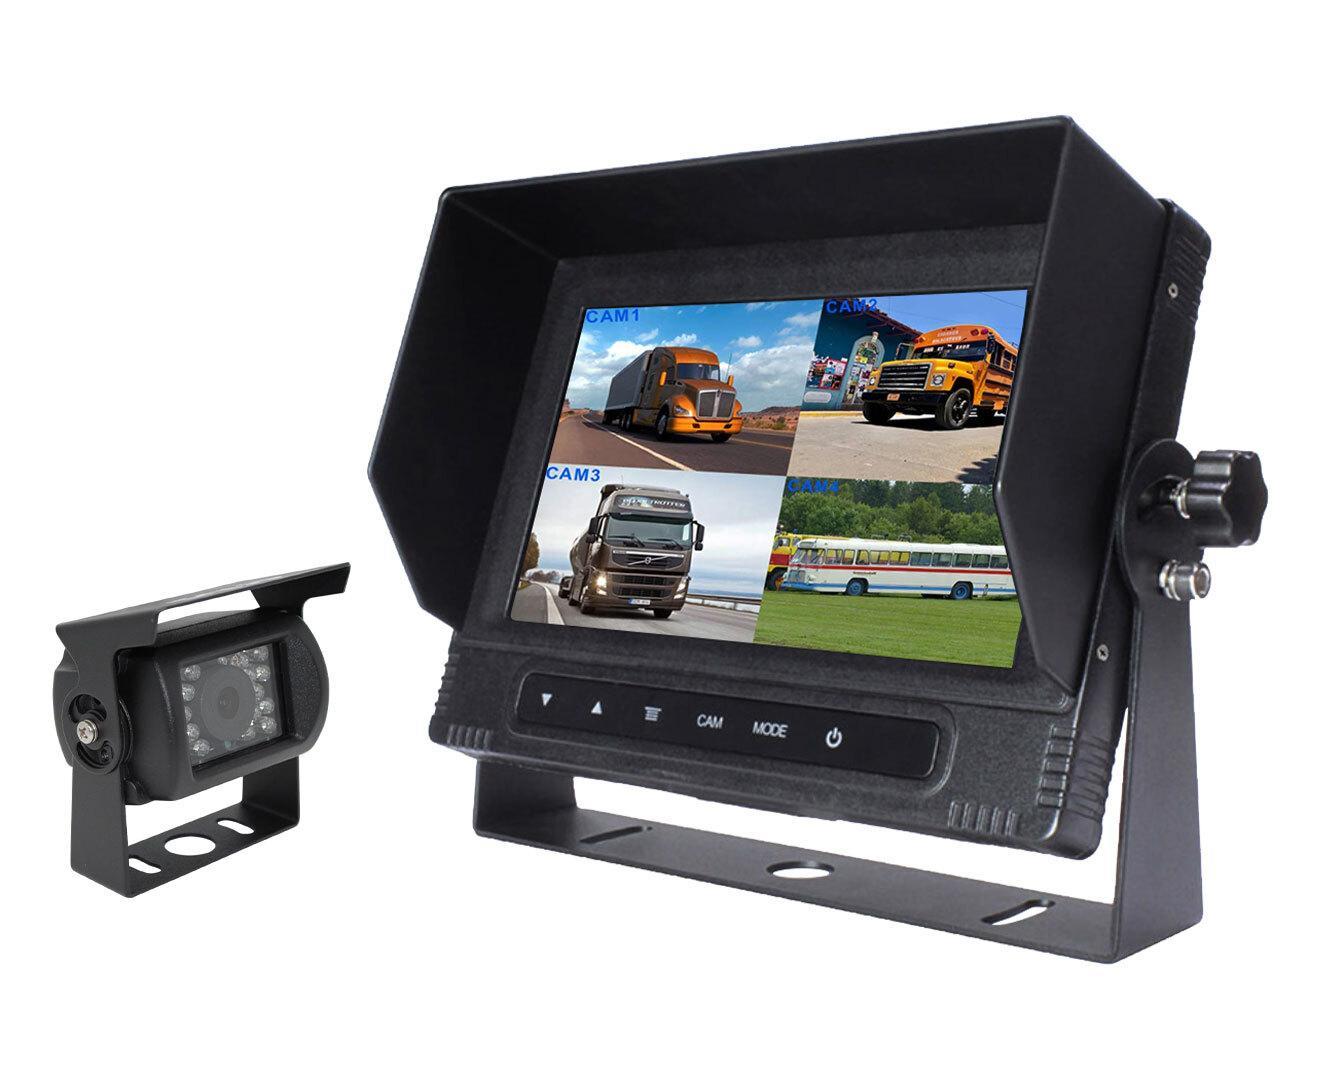 Elinz 7" Quad Screen Waterproof Monitor HD 12V/24V Reversing CCD Camera Mining Vehicle Truck Caravan Boat with 1 Camera and 1x 10M Cable